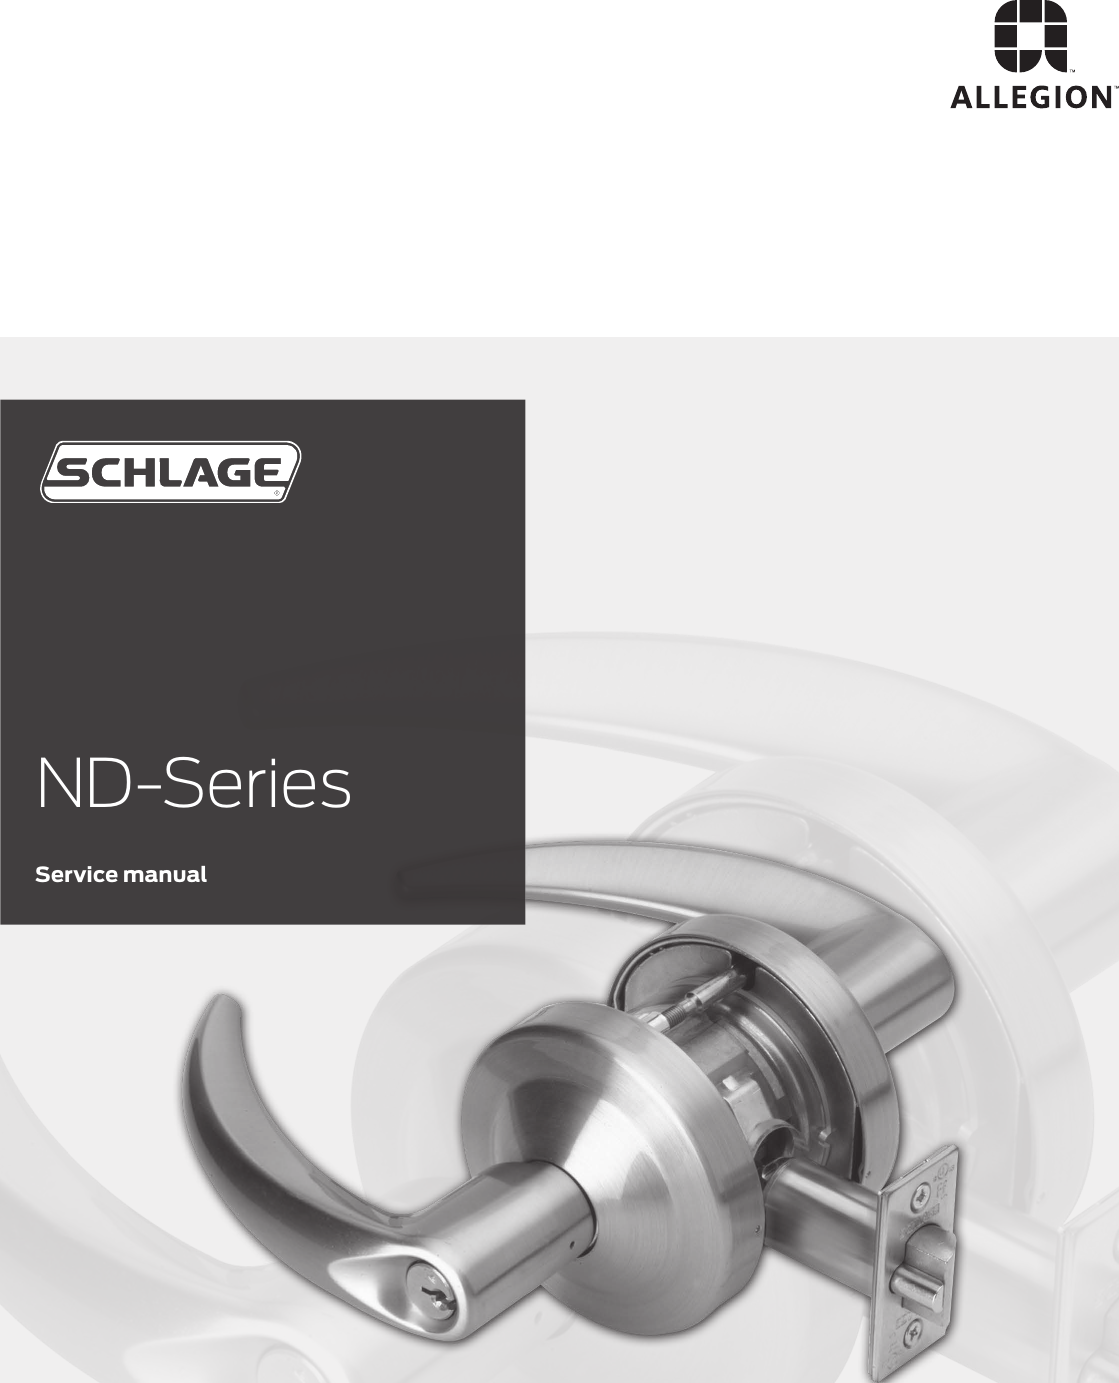 schlage-nd-series-service-manual-106499ndservicemanual